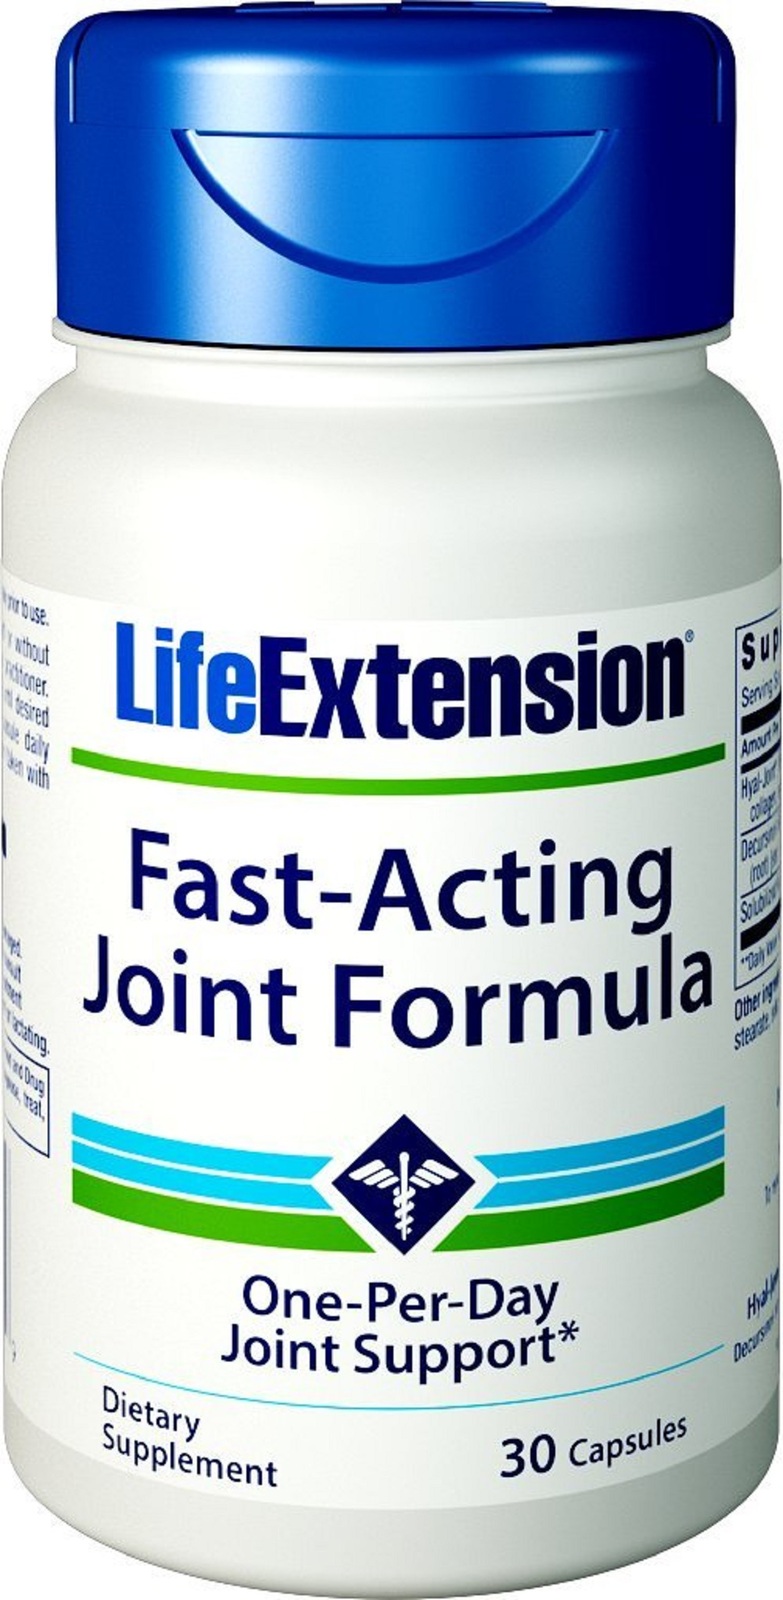 Life Extension Fast-Acting Joint Formula, 30 Capsules